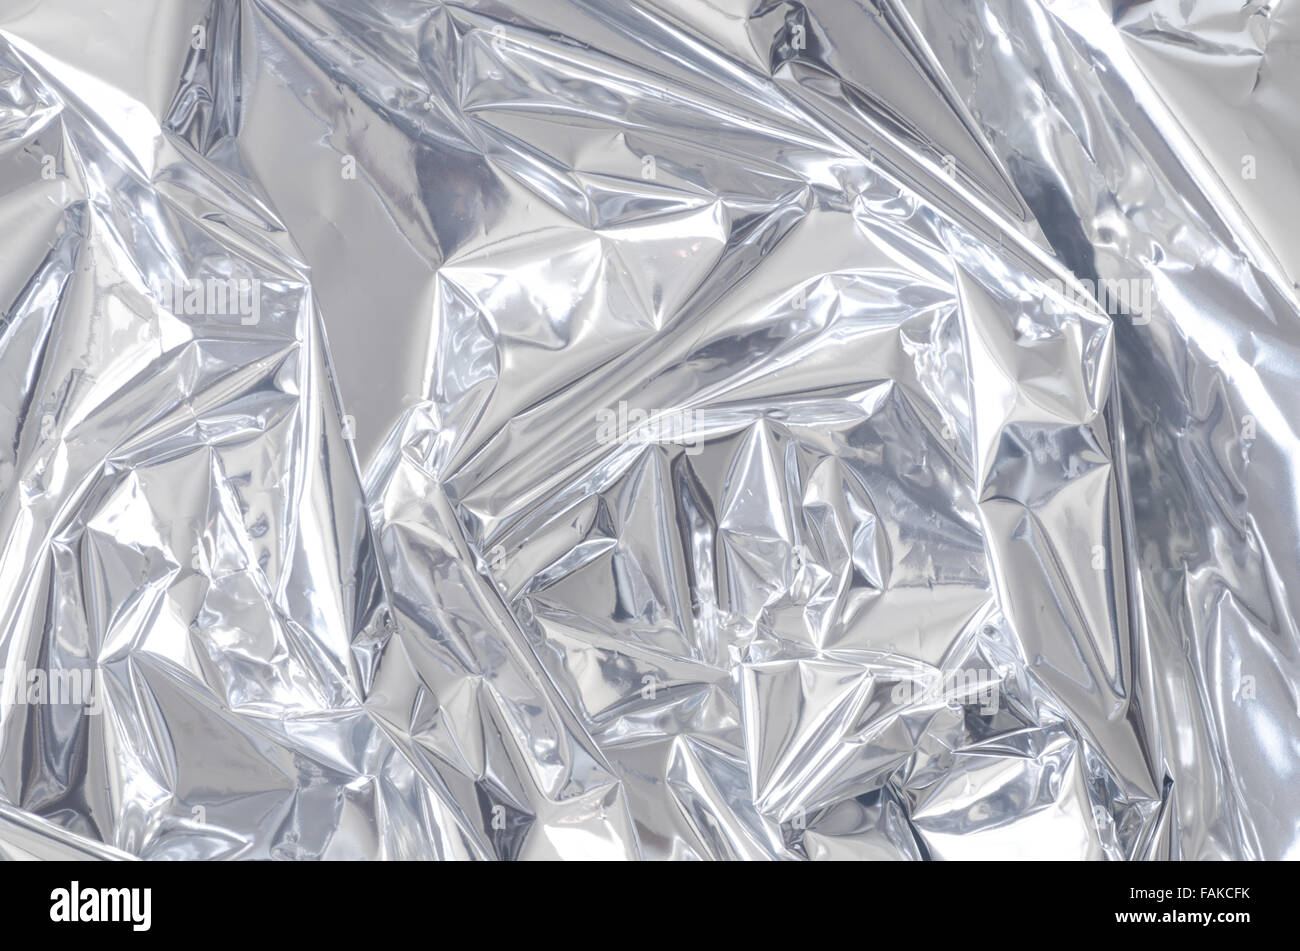 Silver foil Stock Photos, Royalty Free Silver foil Images